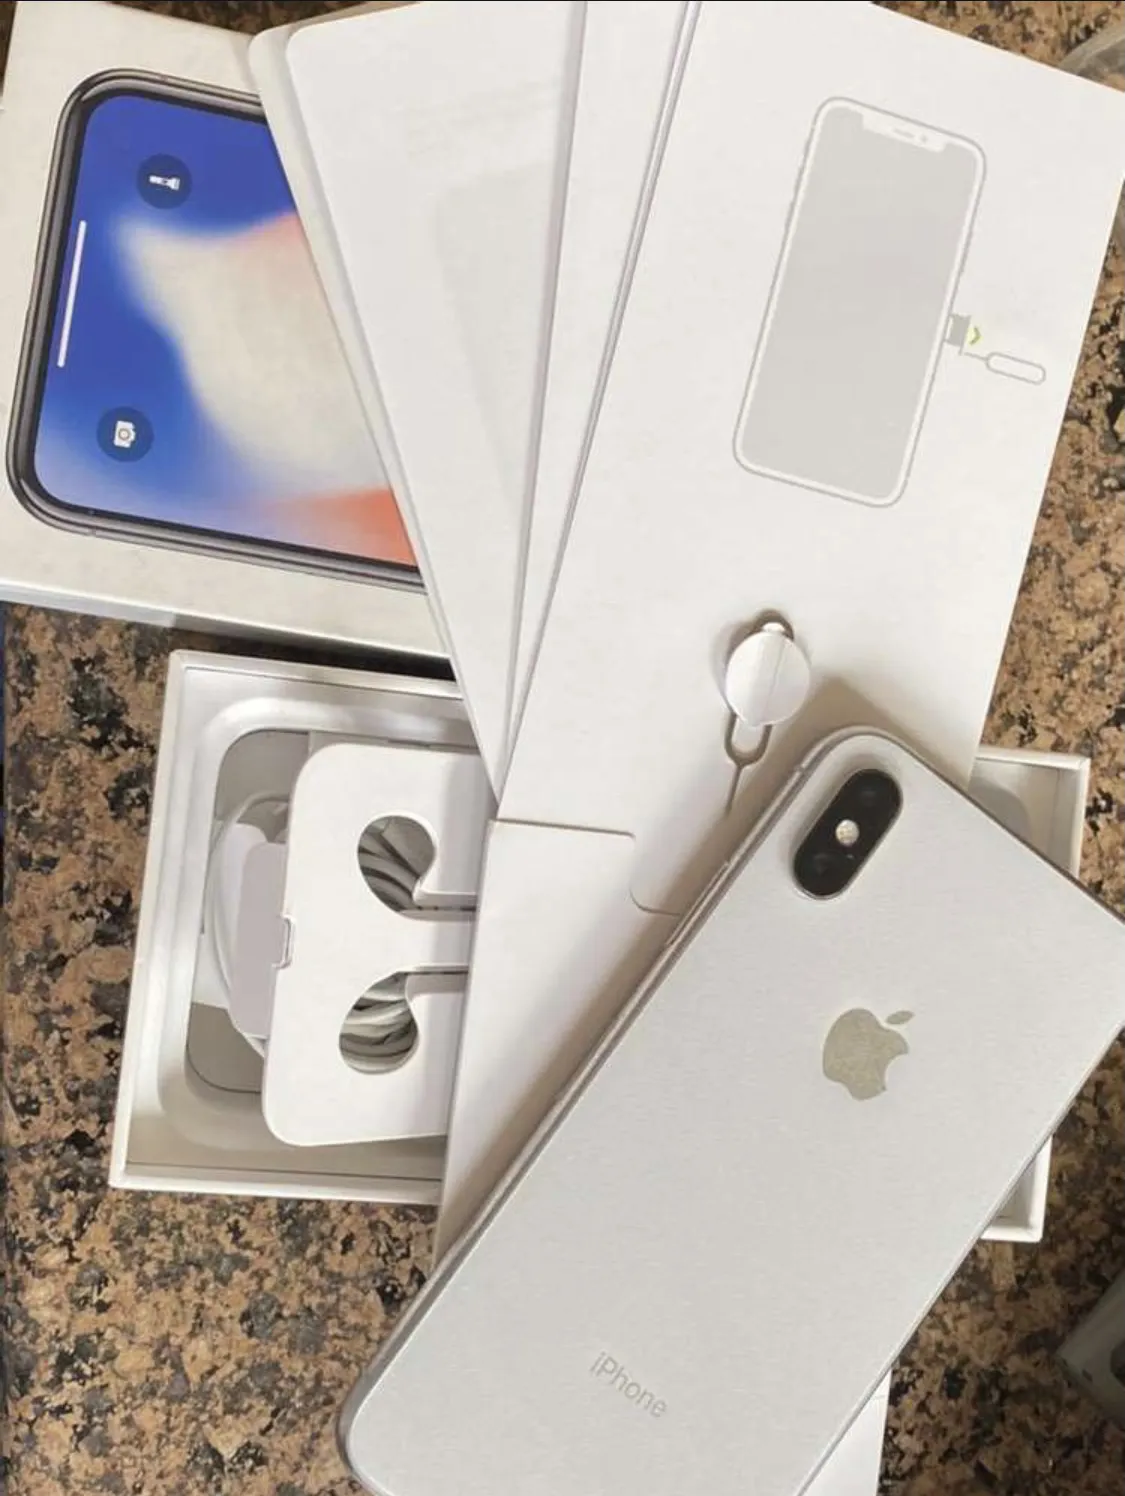 Iphone x 64gb in silver/white - photo 1